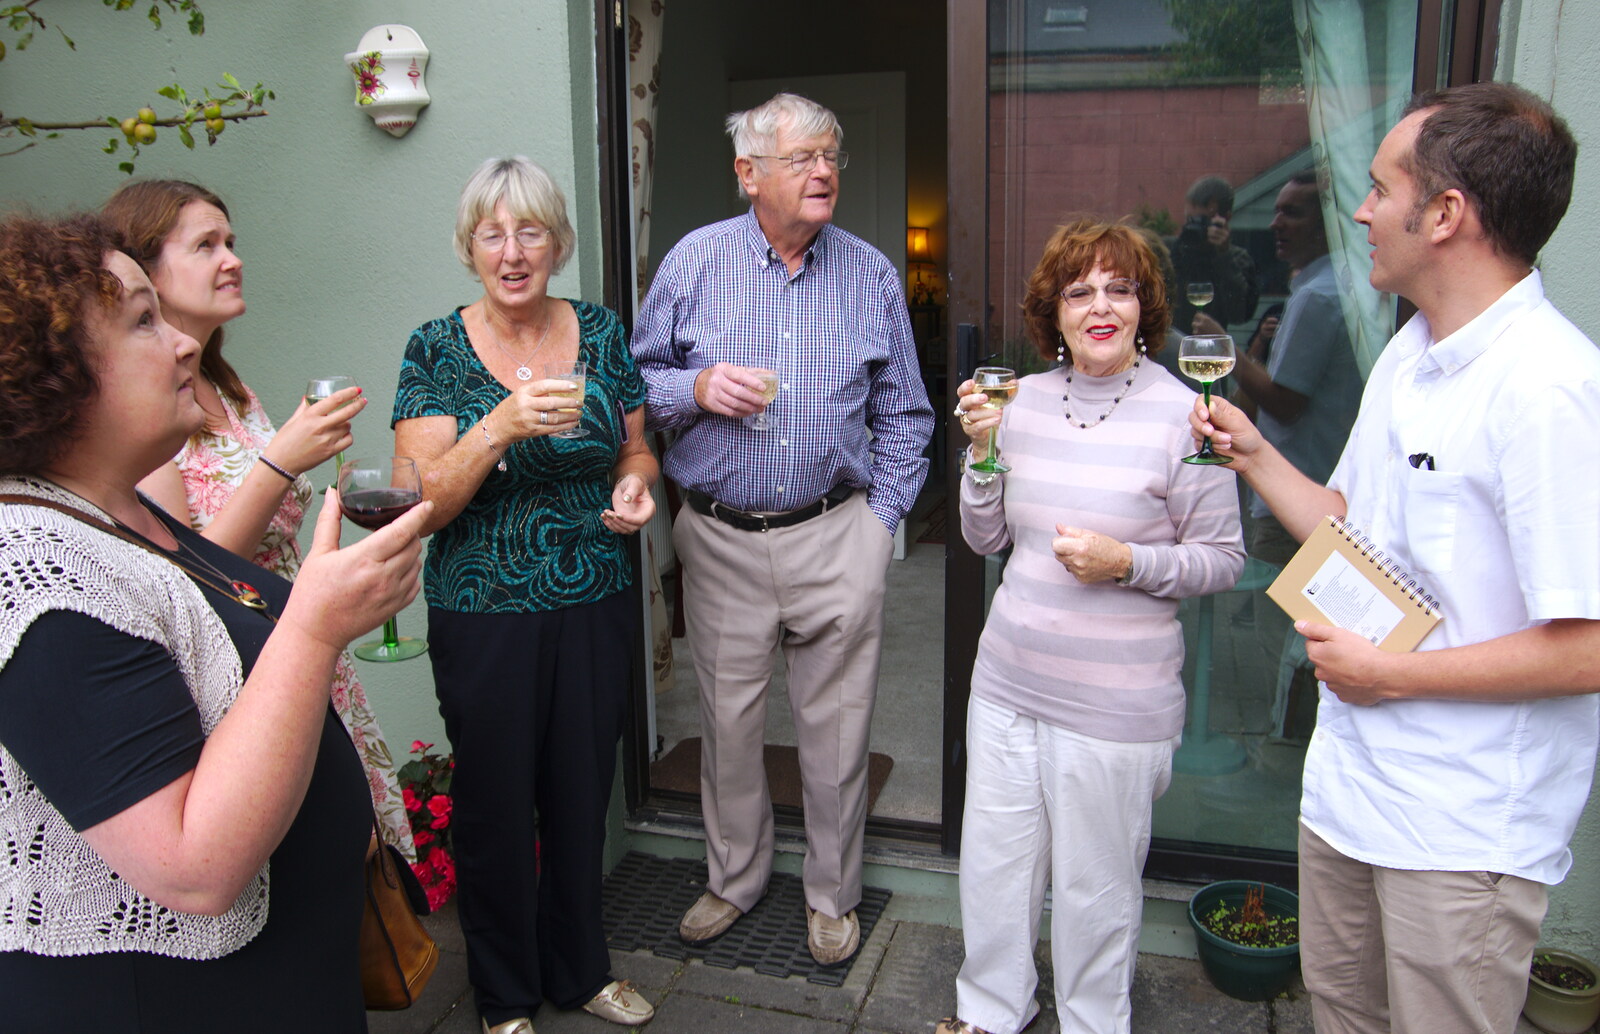 There's a toast down at Jimmy and Catherina's from Jimmy and Catherina's, Ballsbridge, Dublin - 10th August 2019